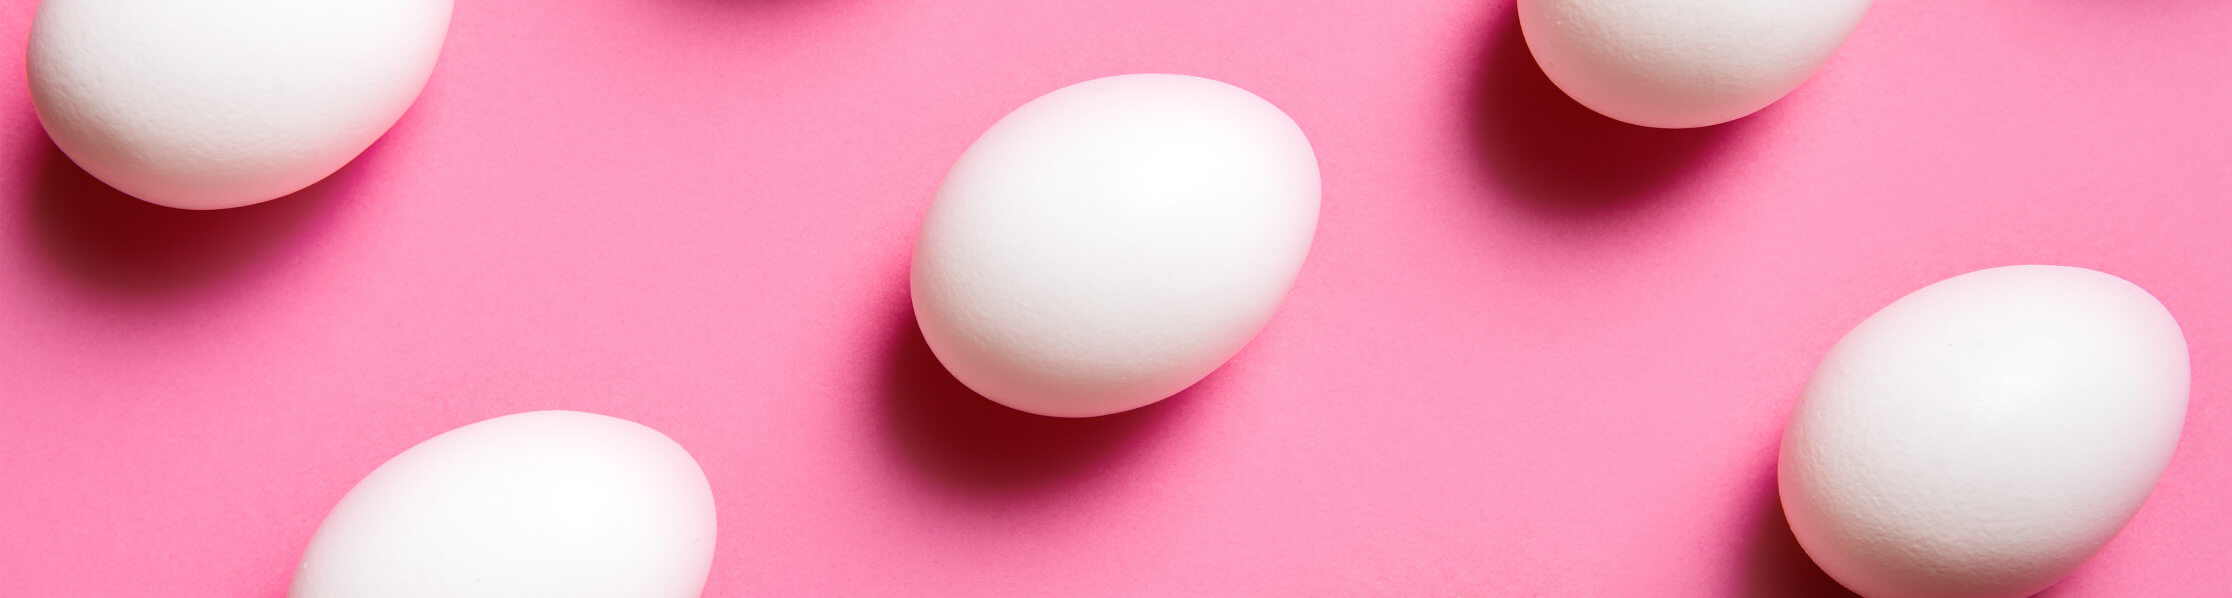 a patterned layout of eggs on a flat surface